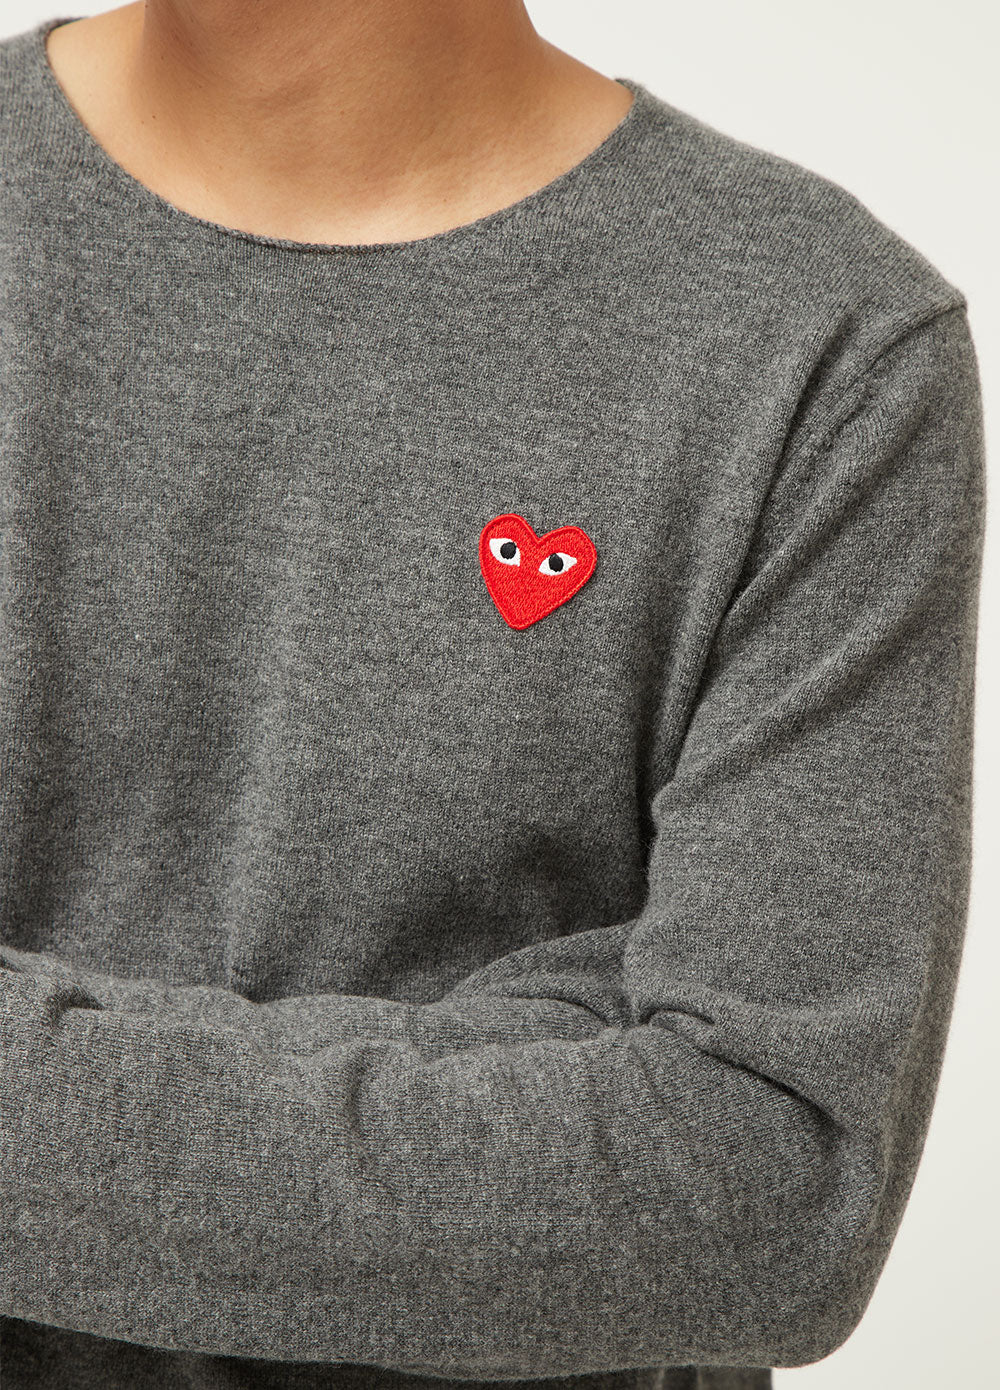 N068 Red Heart Sweater